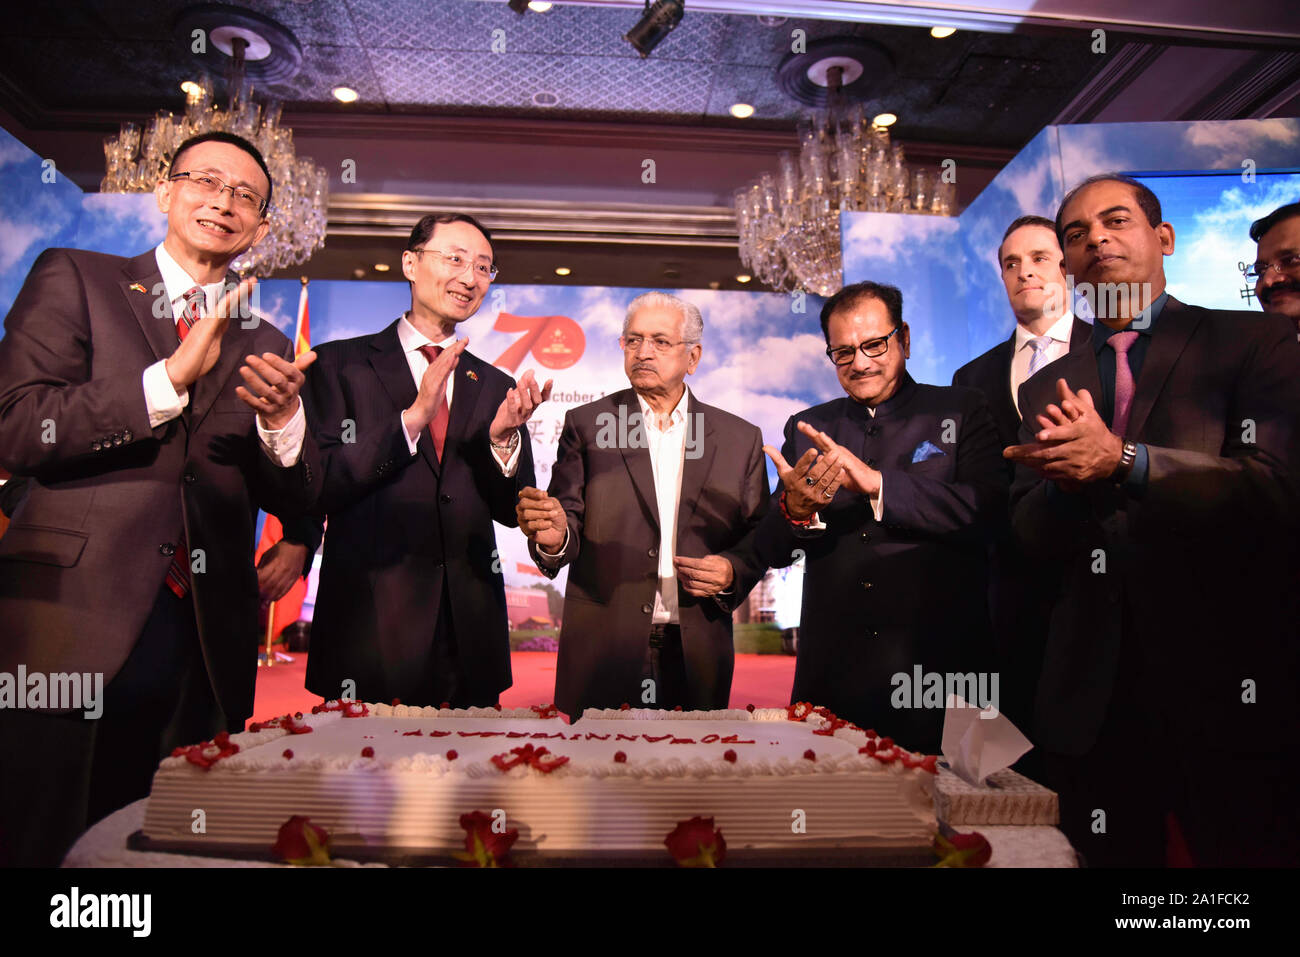 Mumbai, India. 22nd Sep, 2019. Chinese Ambassador to India Sun Weidong attends a reception to celebrate the 70th anniversary of the founding of the People's Republic of China in Mumbai, India, Sept. 22, 2019. Over 400 Indian and Chinese people from various walks of life attended a grand reception marking the 70th anniversary of the founding of the People's Republic of China held in India's financial capital Mumbai on Sunday evening. Credit: Fariha Farooqui/Xinhua Stock Photo